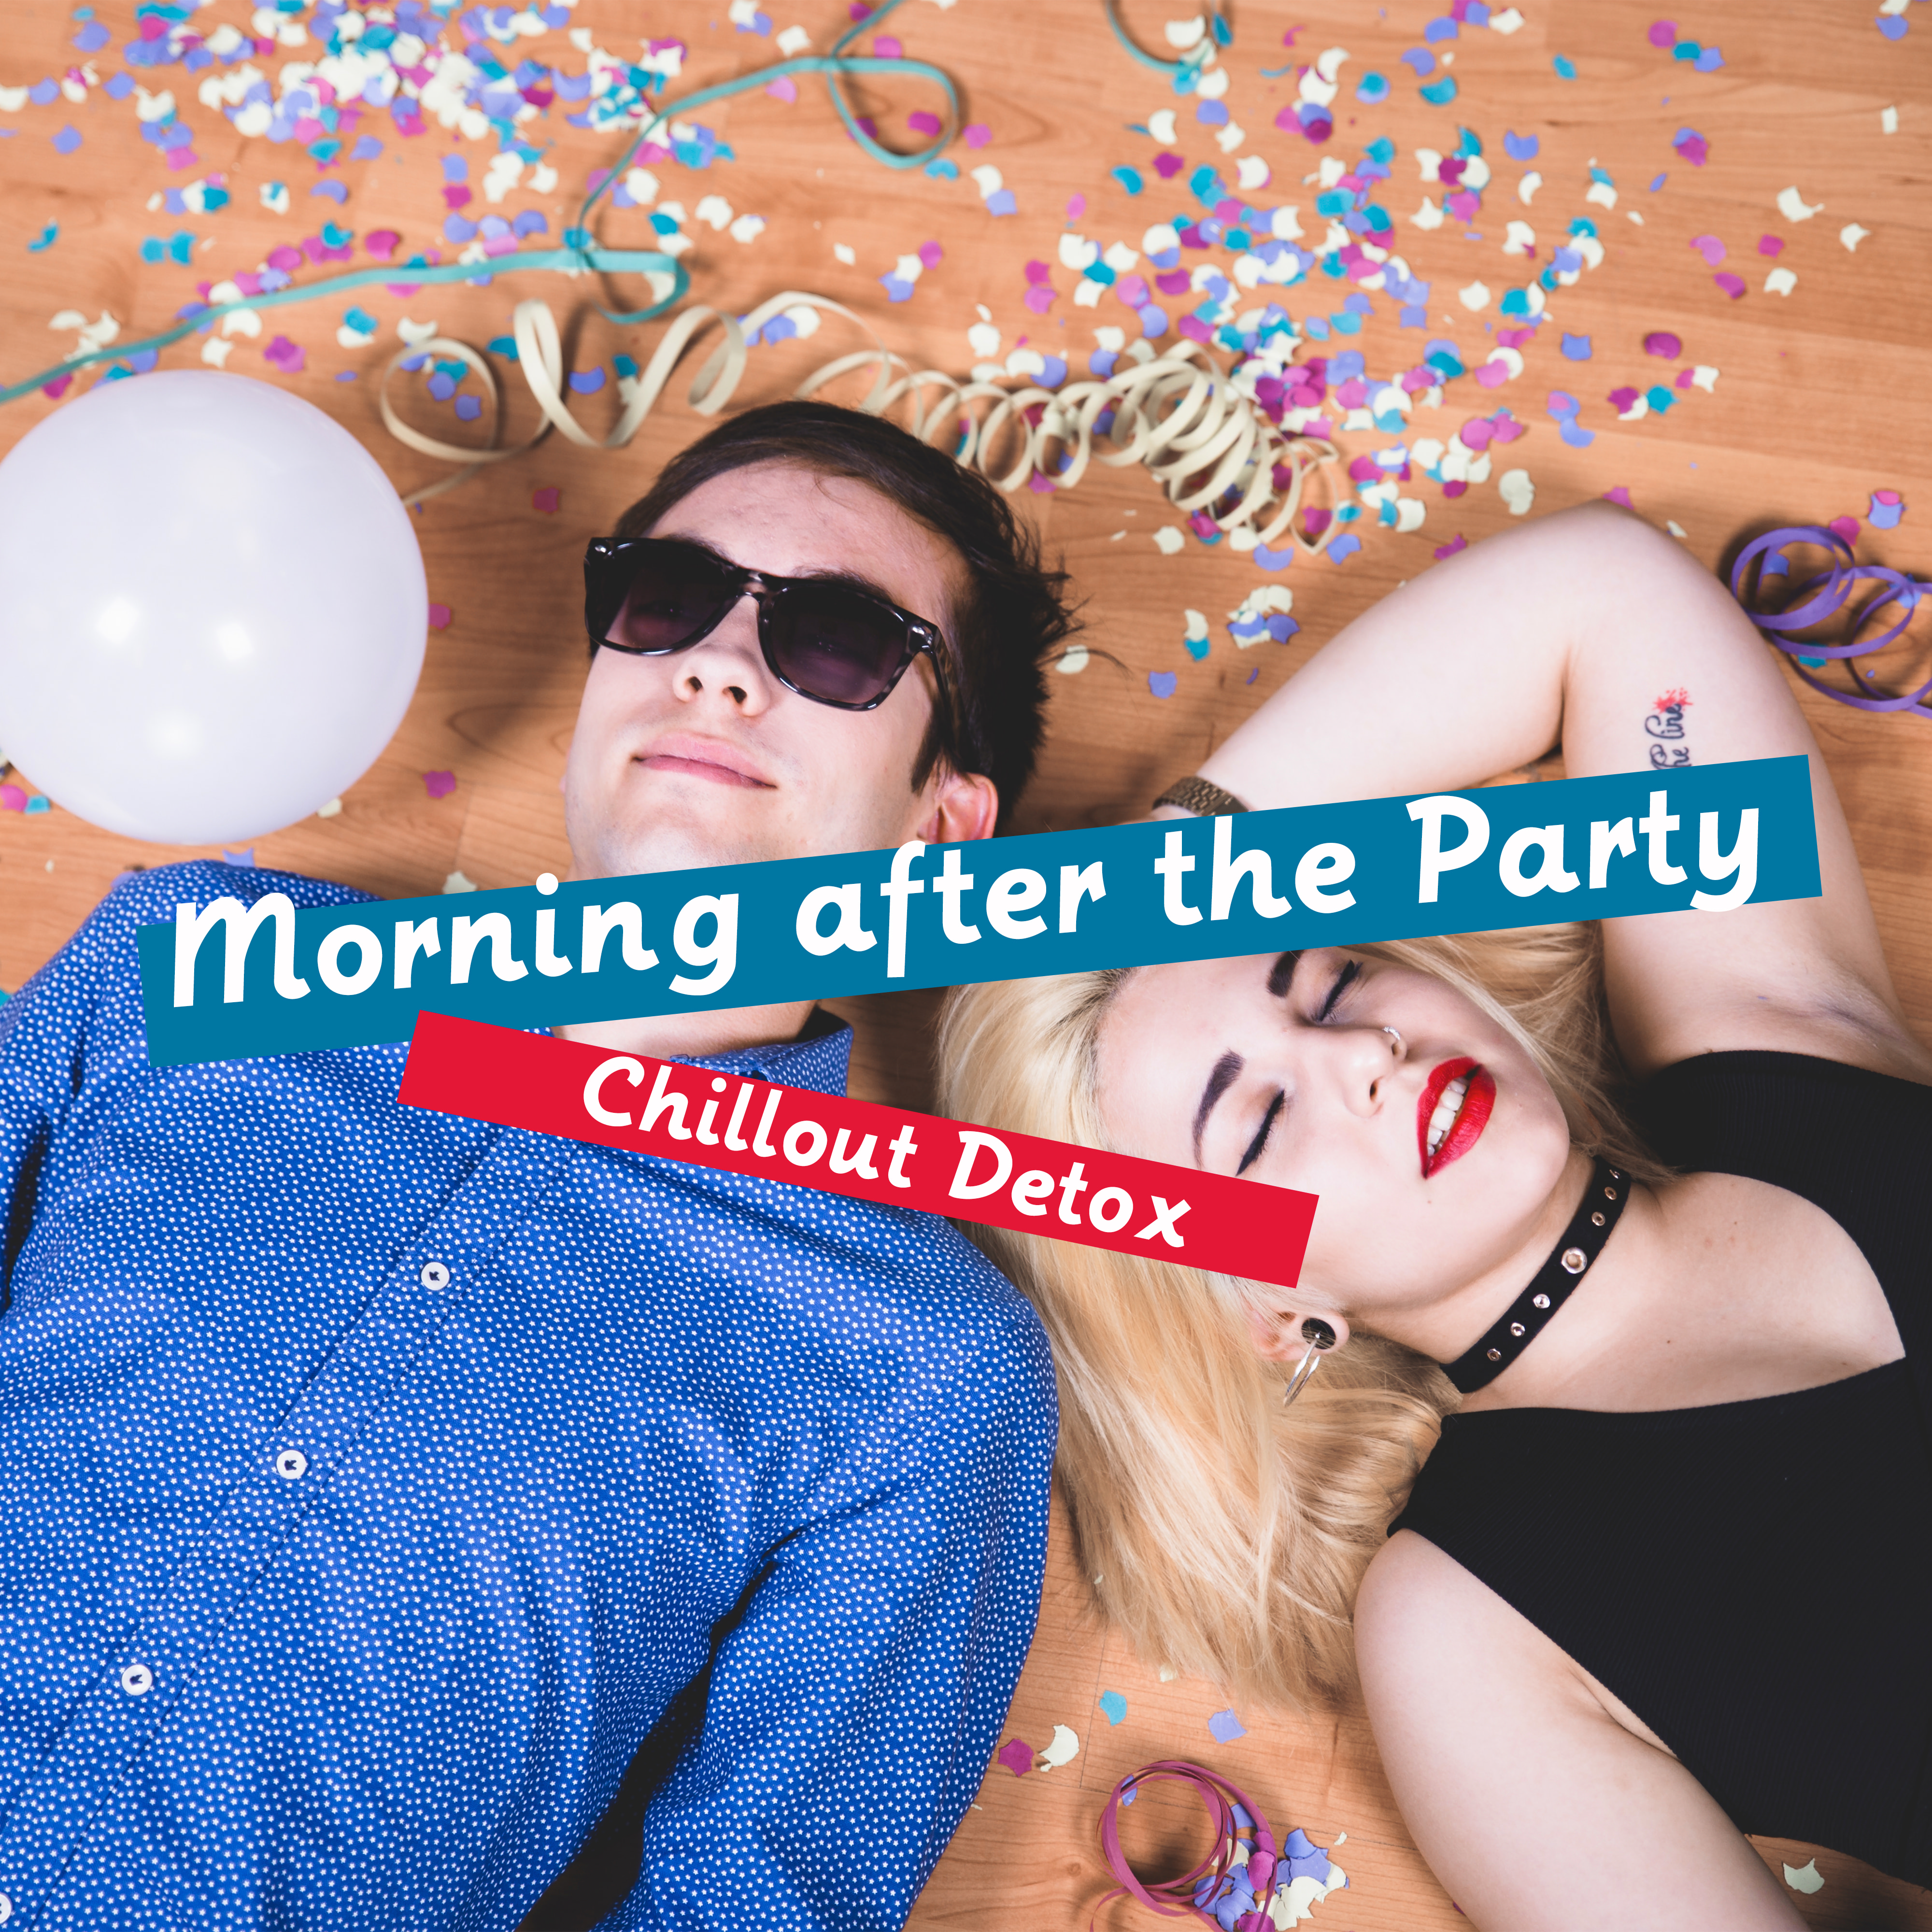 Morning after the Party: Chillout Detox